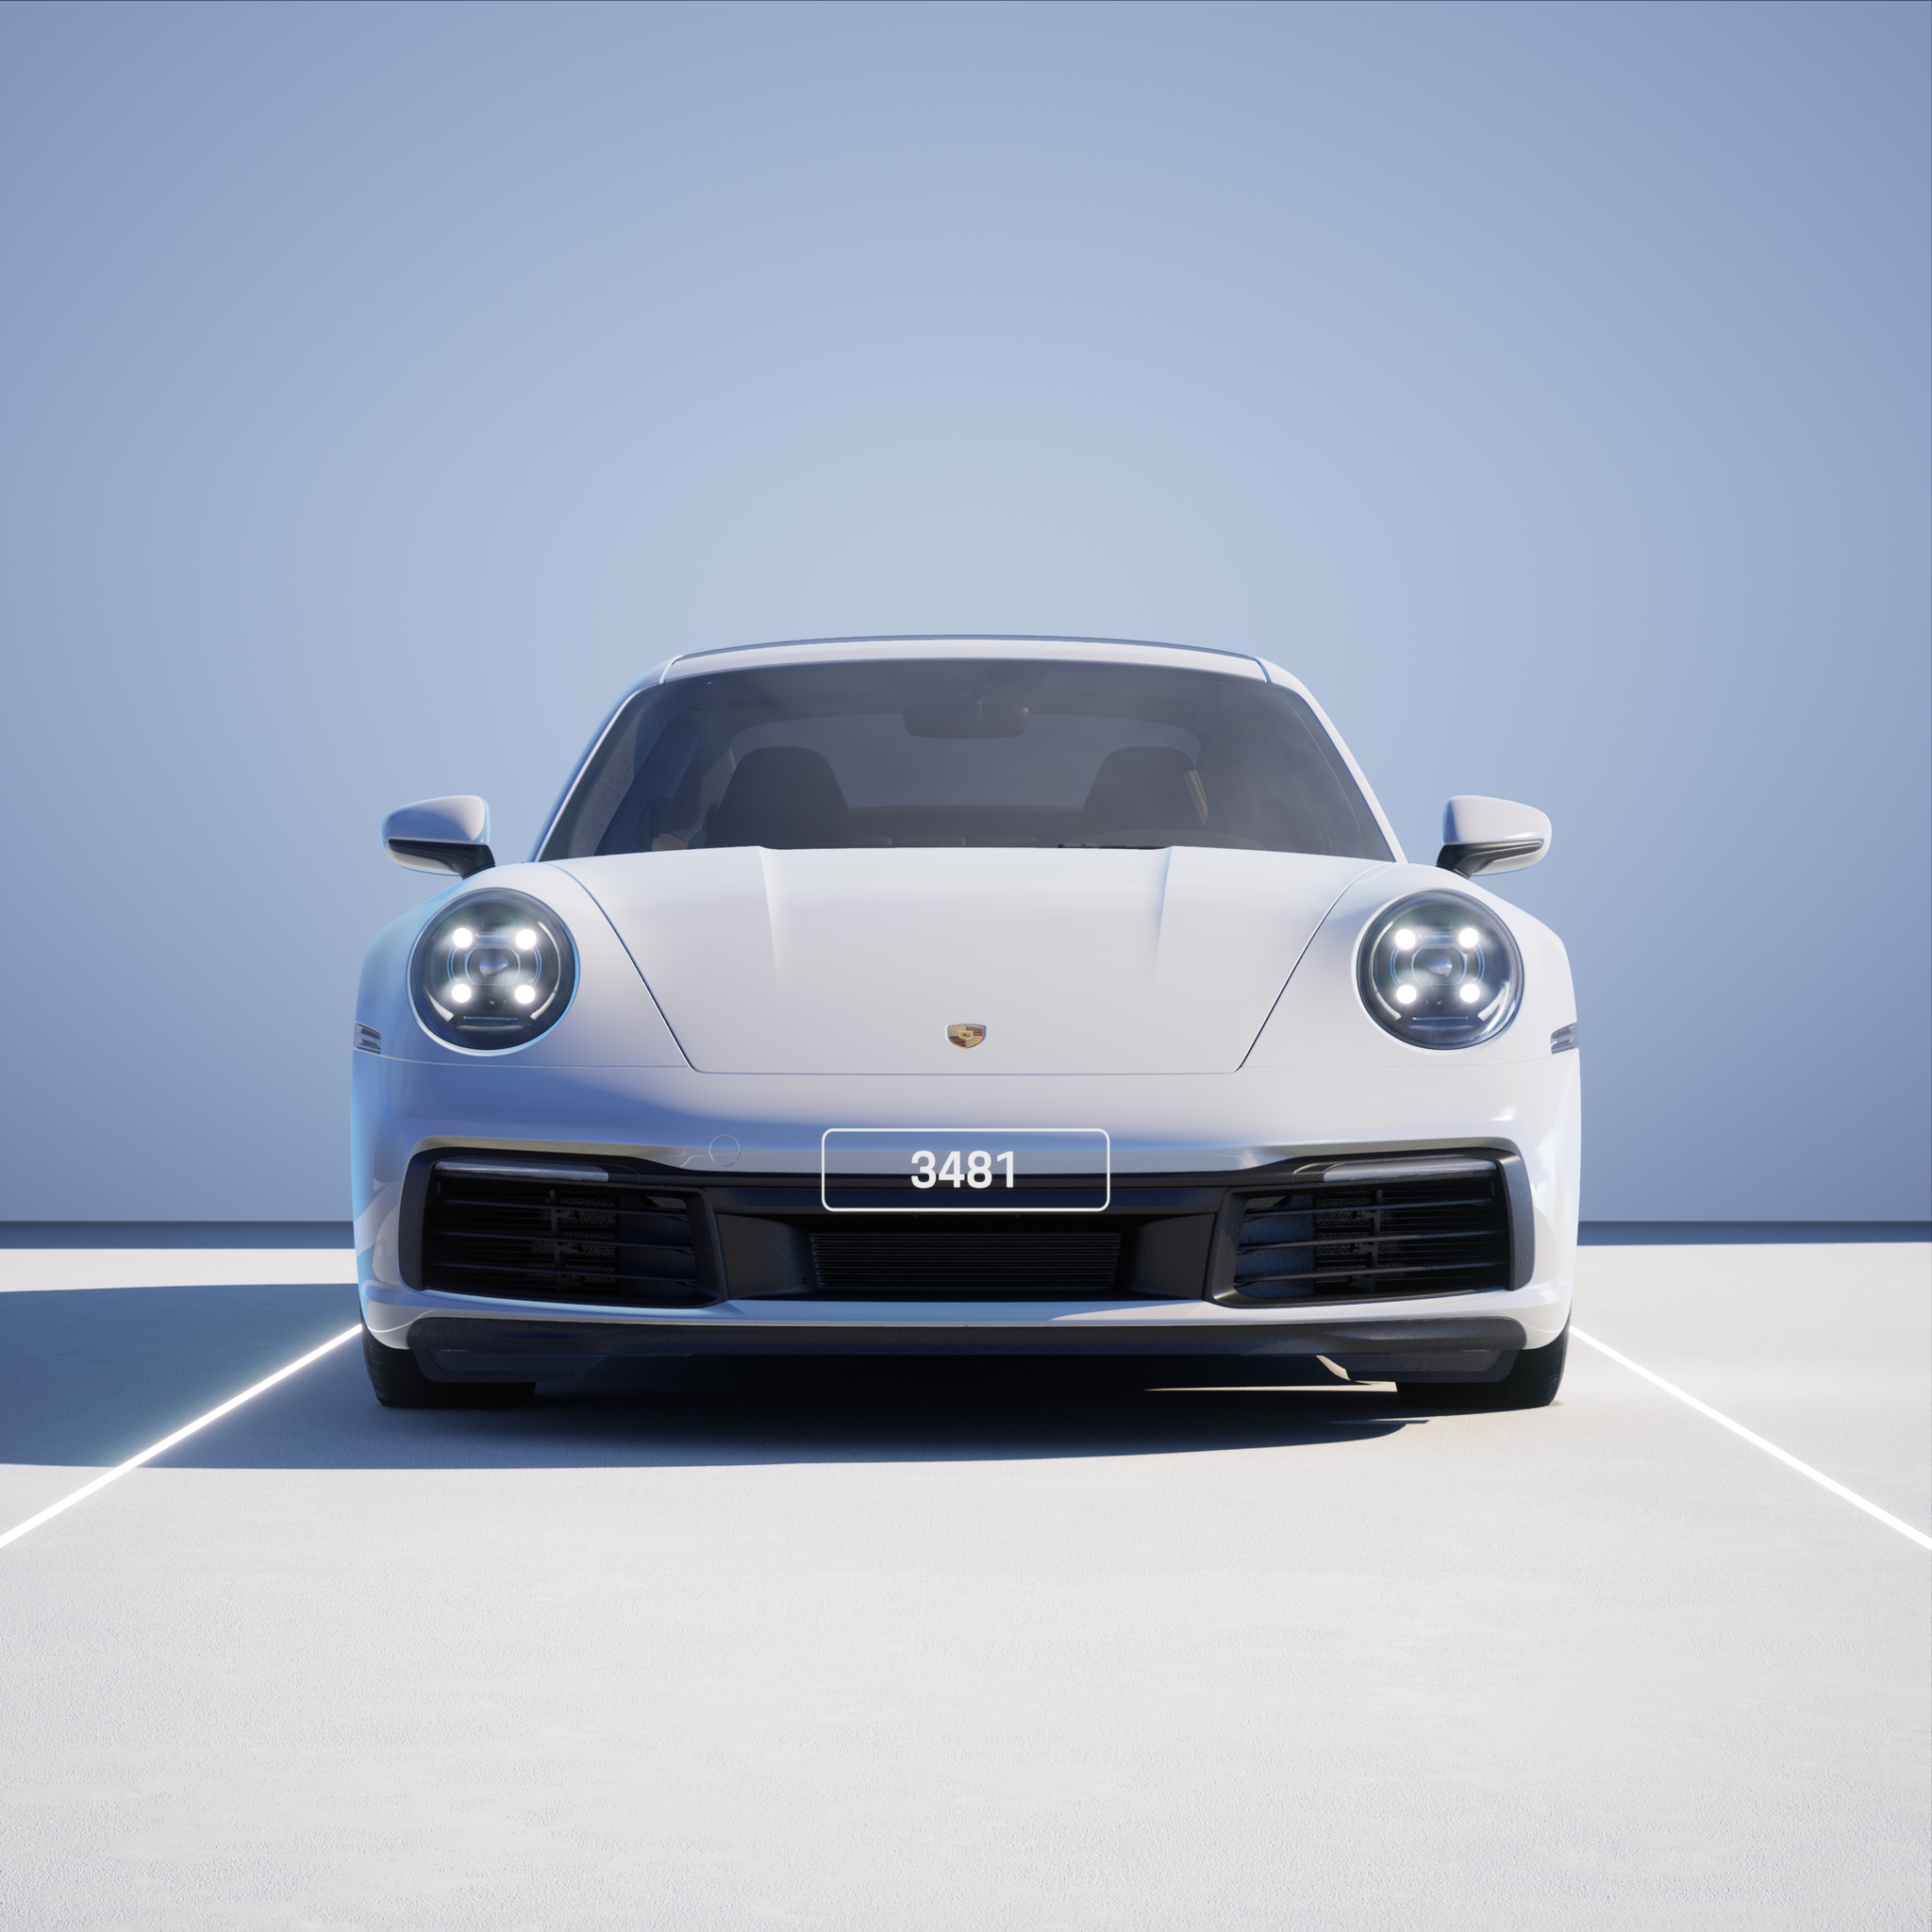 The PORSCHΞ 911 3481 image in phase